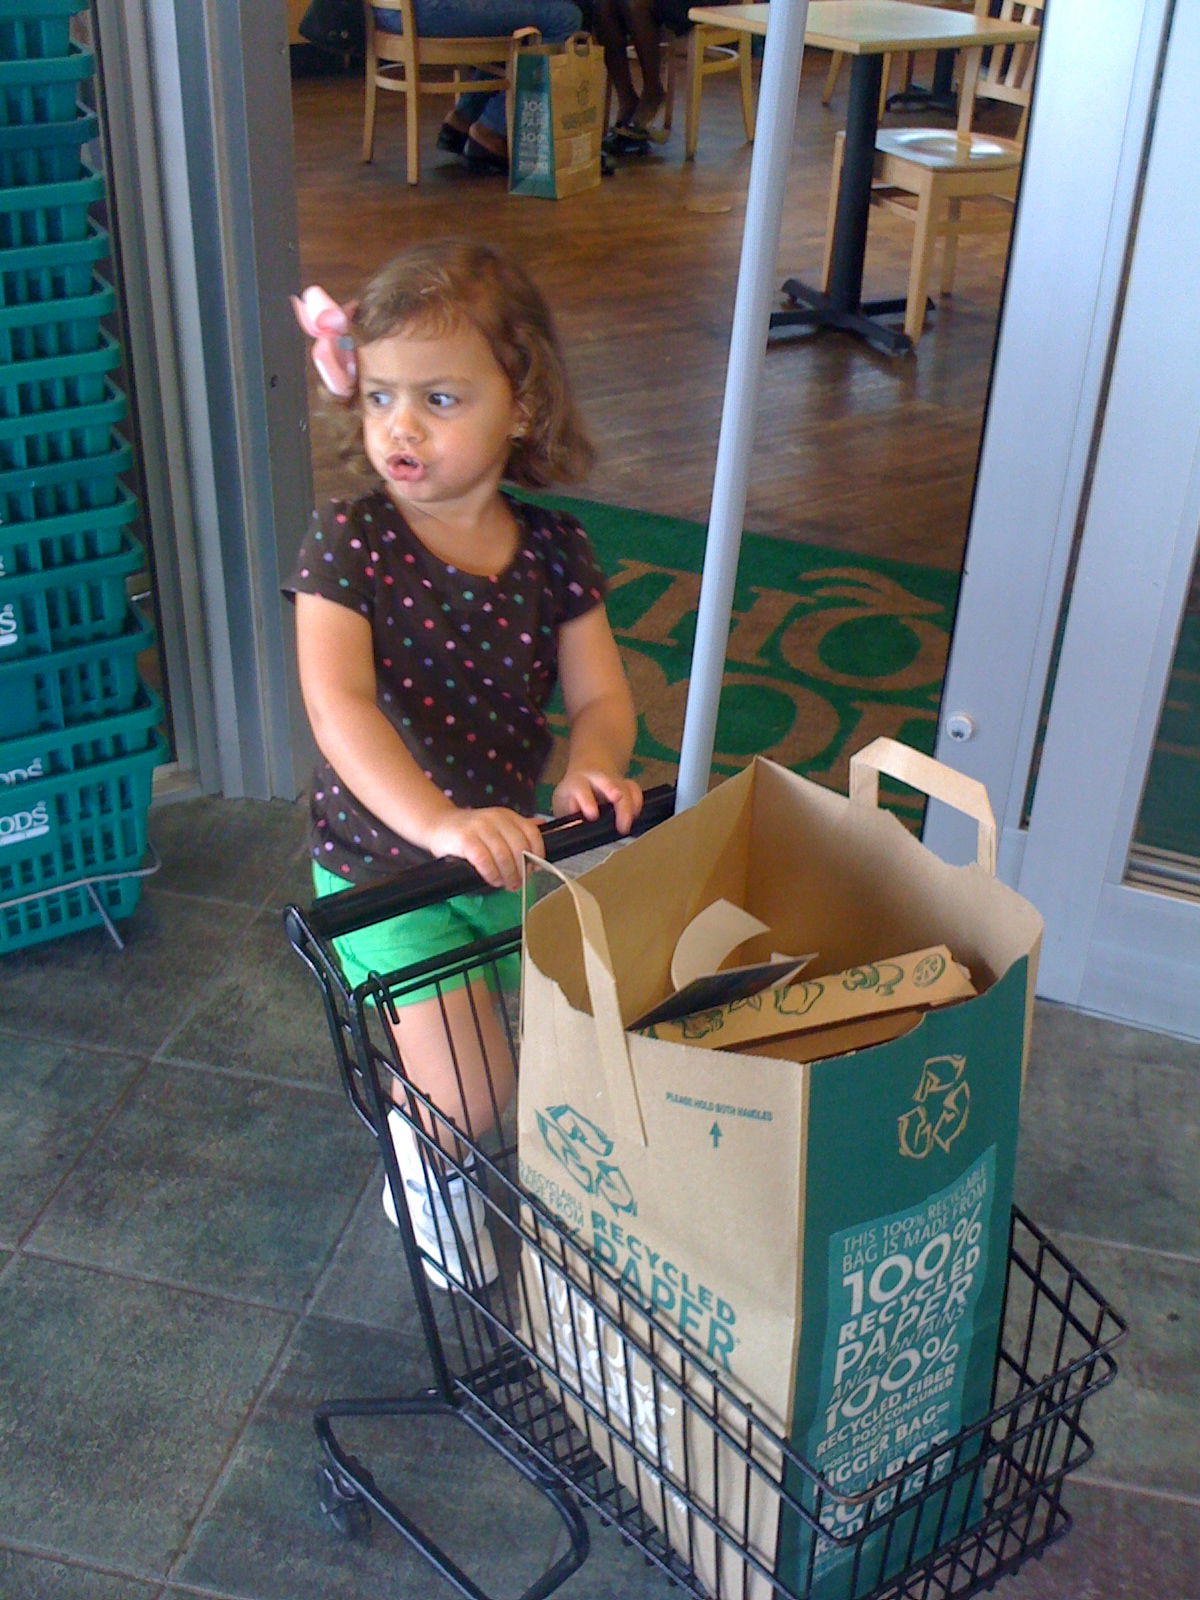 Whole Foods, the one with the shopping cart!